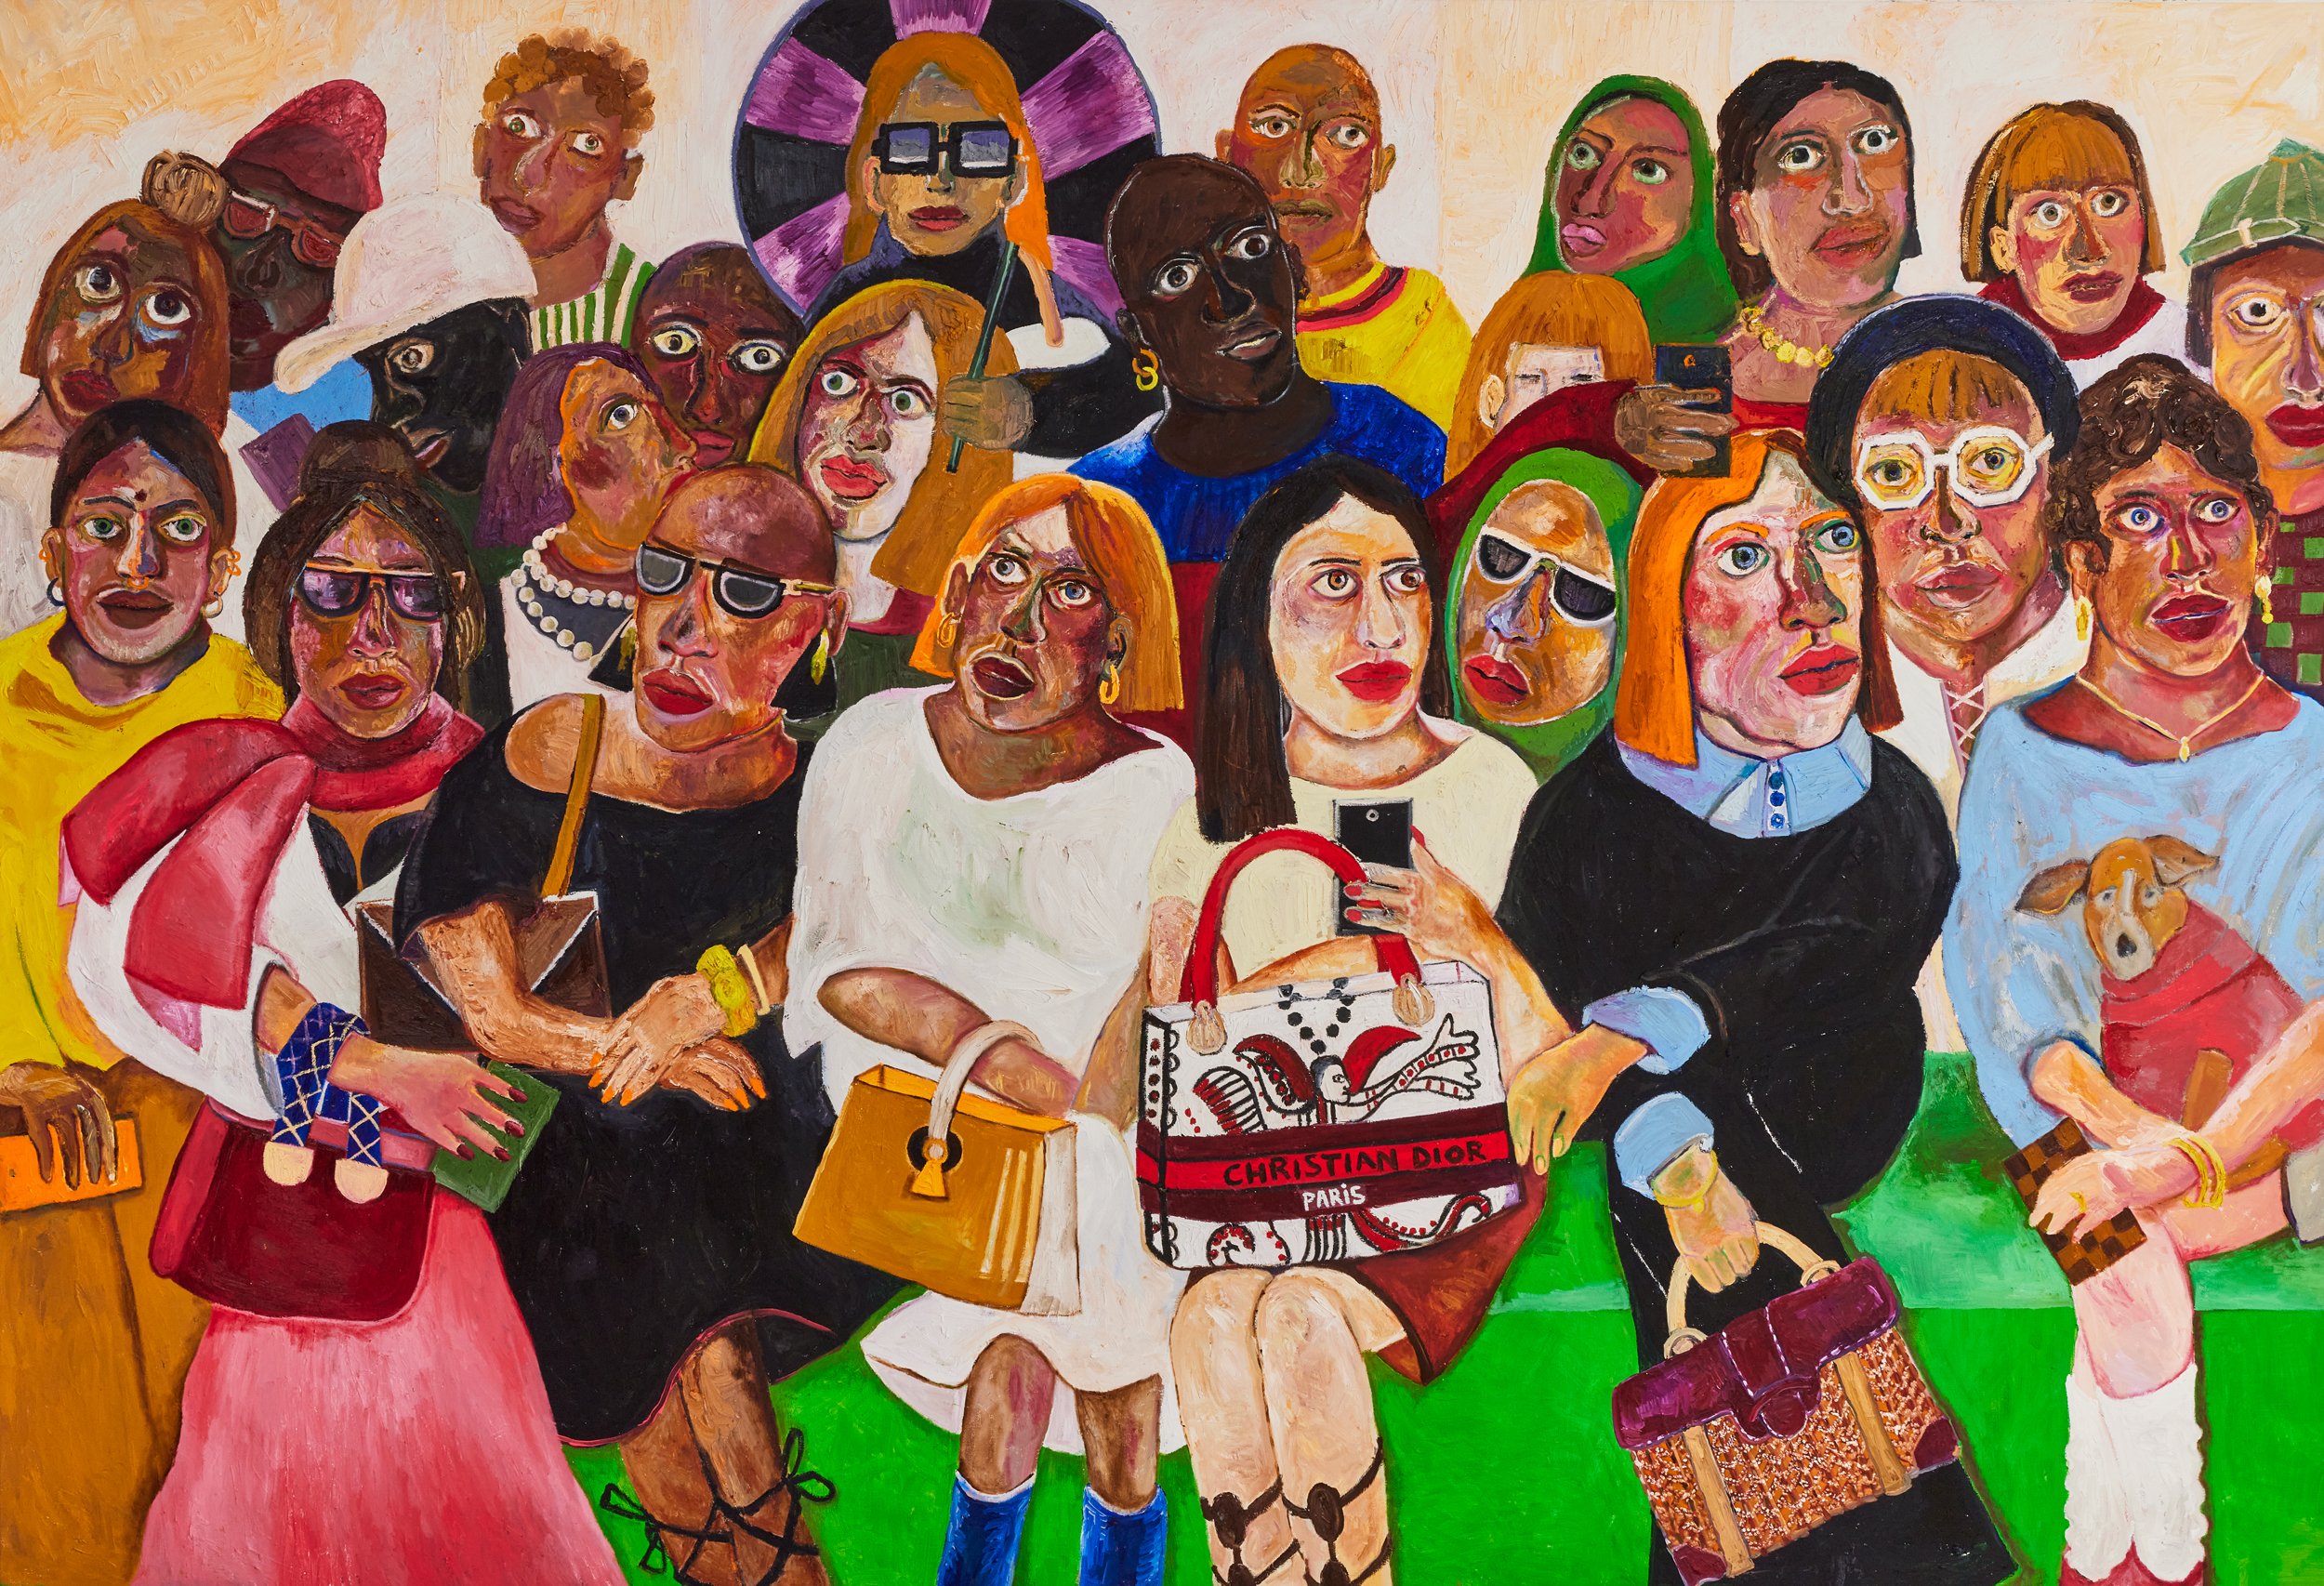 Jade van der Mark No time for your opinion, 2022 oil on canvas 205 x 300 cm 80 3/4 x 118 1/8 in (JvDM304009)